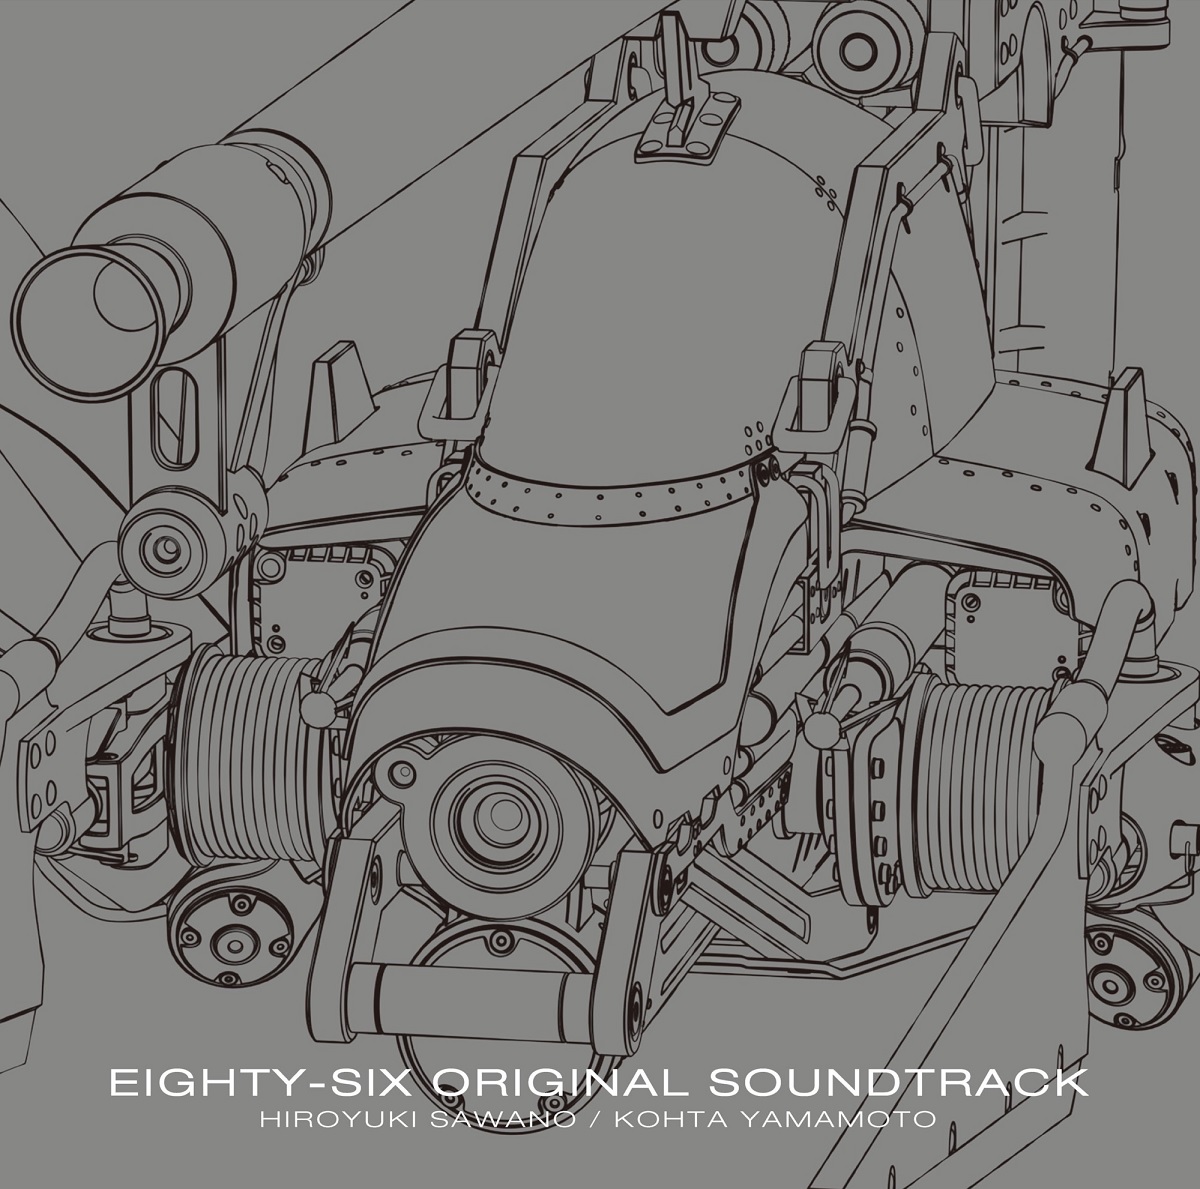 Cover art for『Hiroyuki Sawano feat. Laco - THE ANSWER』from the release『EIGHTY-SIX ORIGINAL SOUNDTRACK